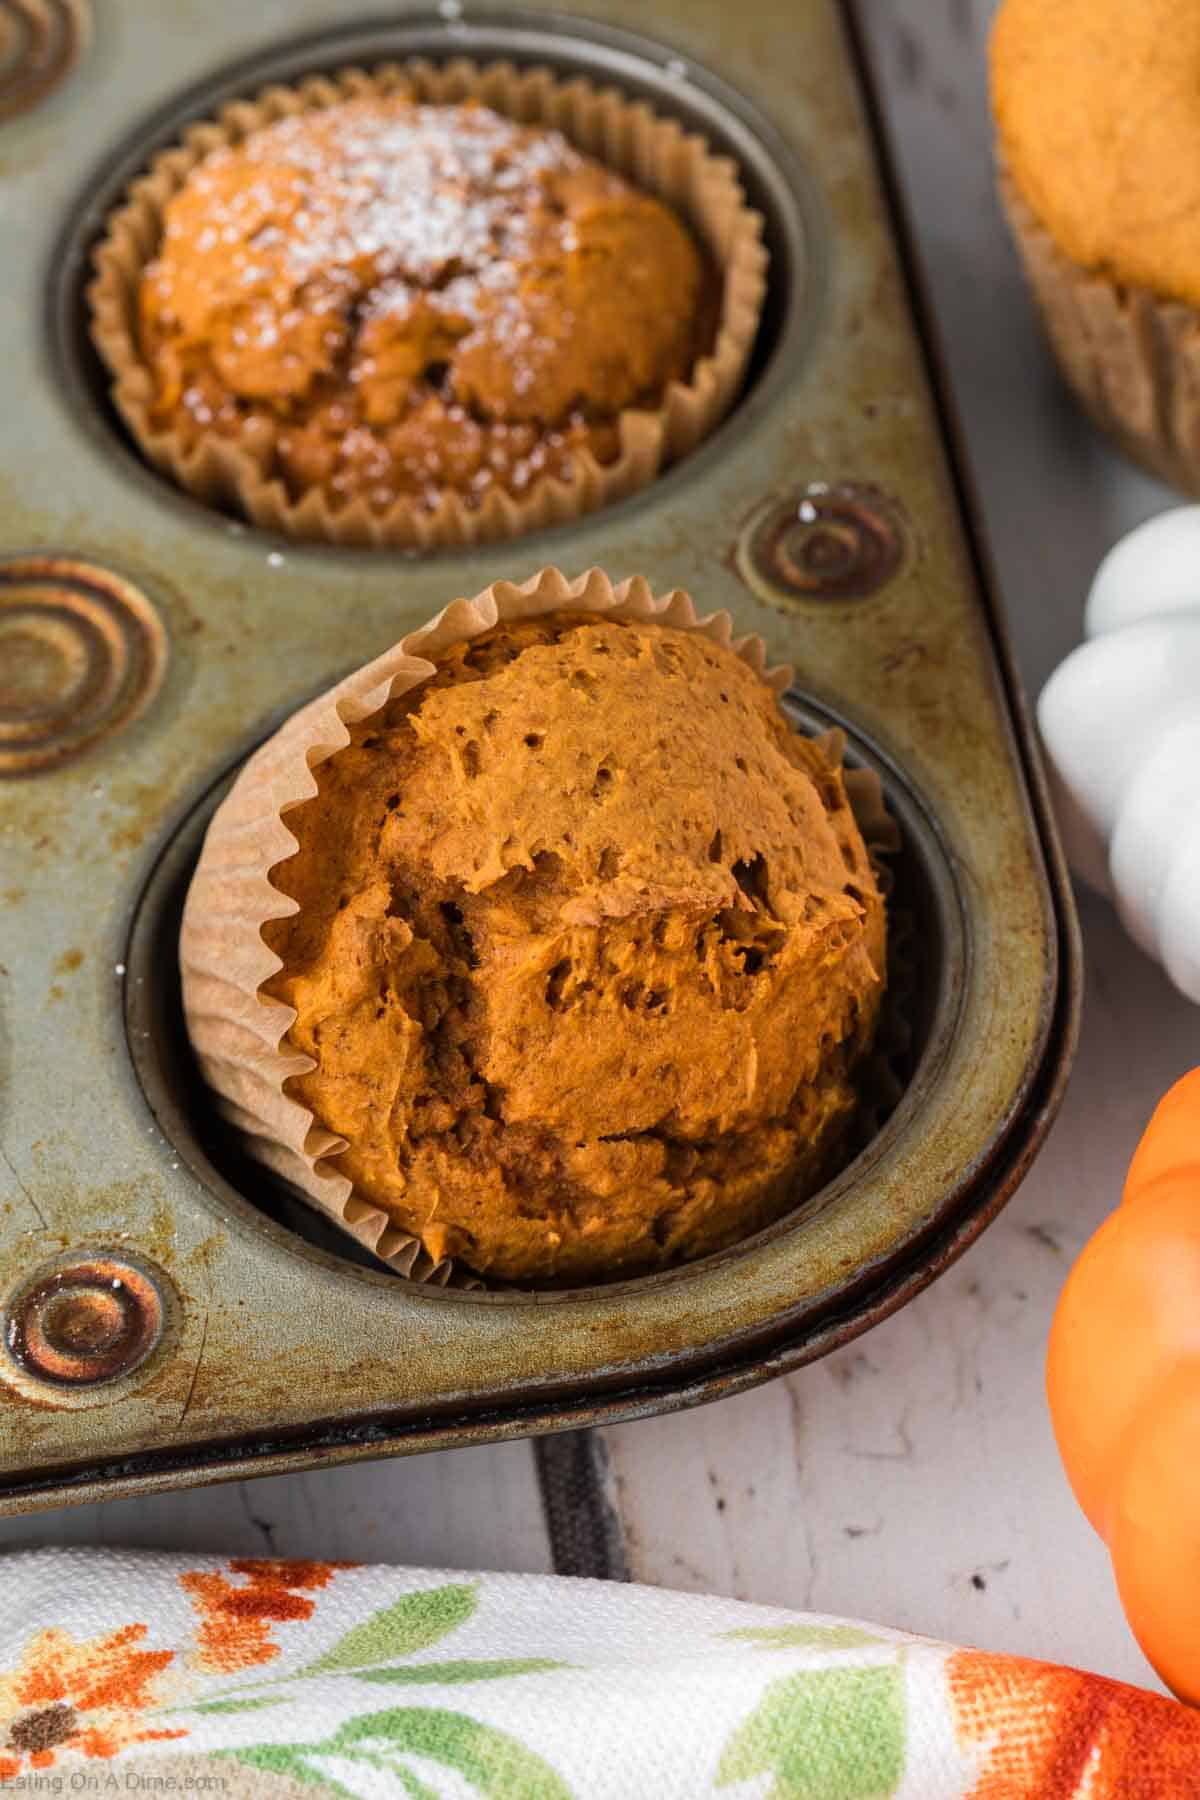 Close-up of a muffin pan with two 2 Ingredient Pumpkin Muffins, one sprinkled with powdered sugar and one plain, nestled in paper liners. The pan is slightly worn, adding rustic charm. A small white pumpkin and part of an orange towel with floral patterns are visible in the background.